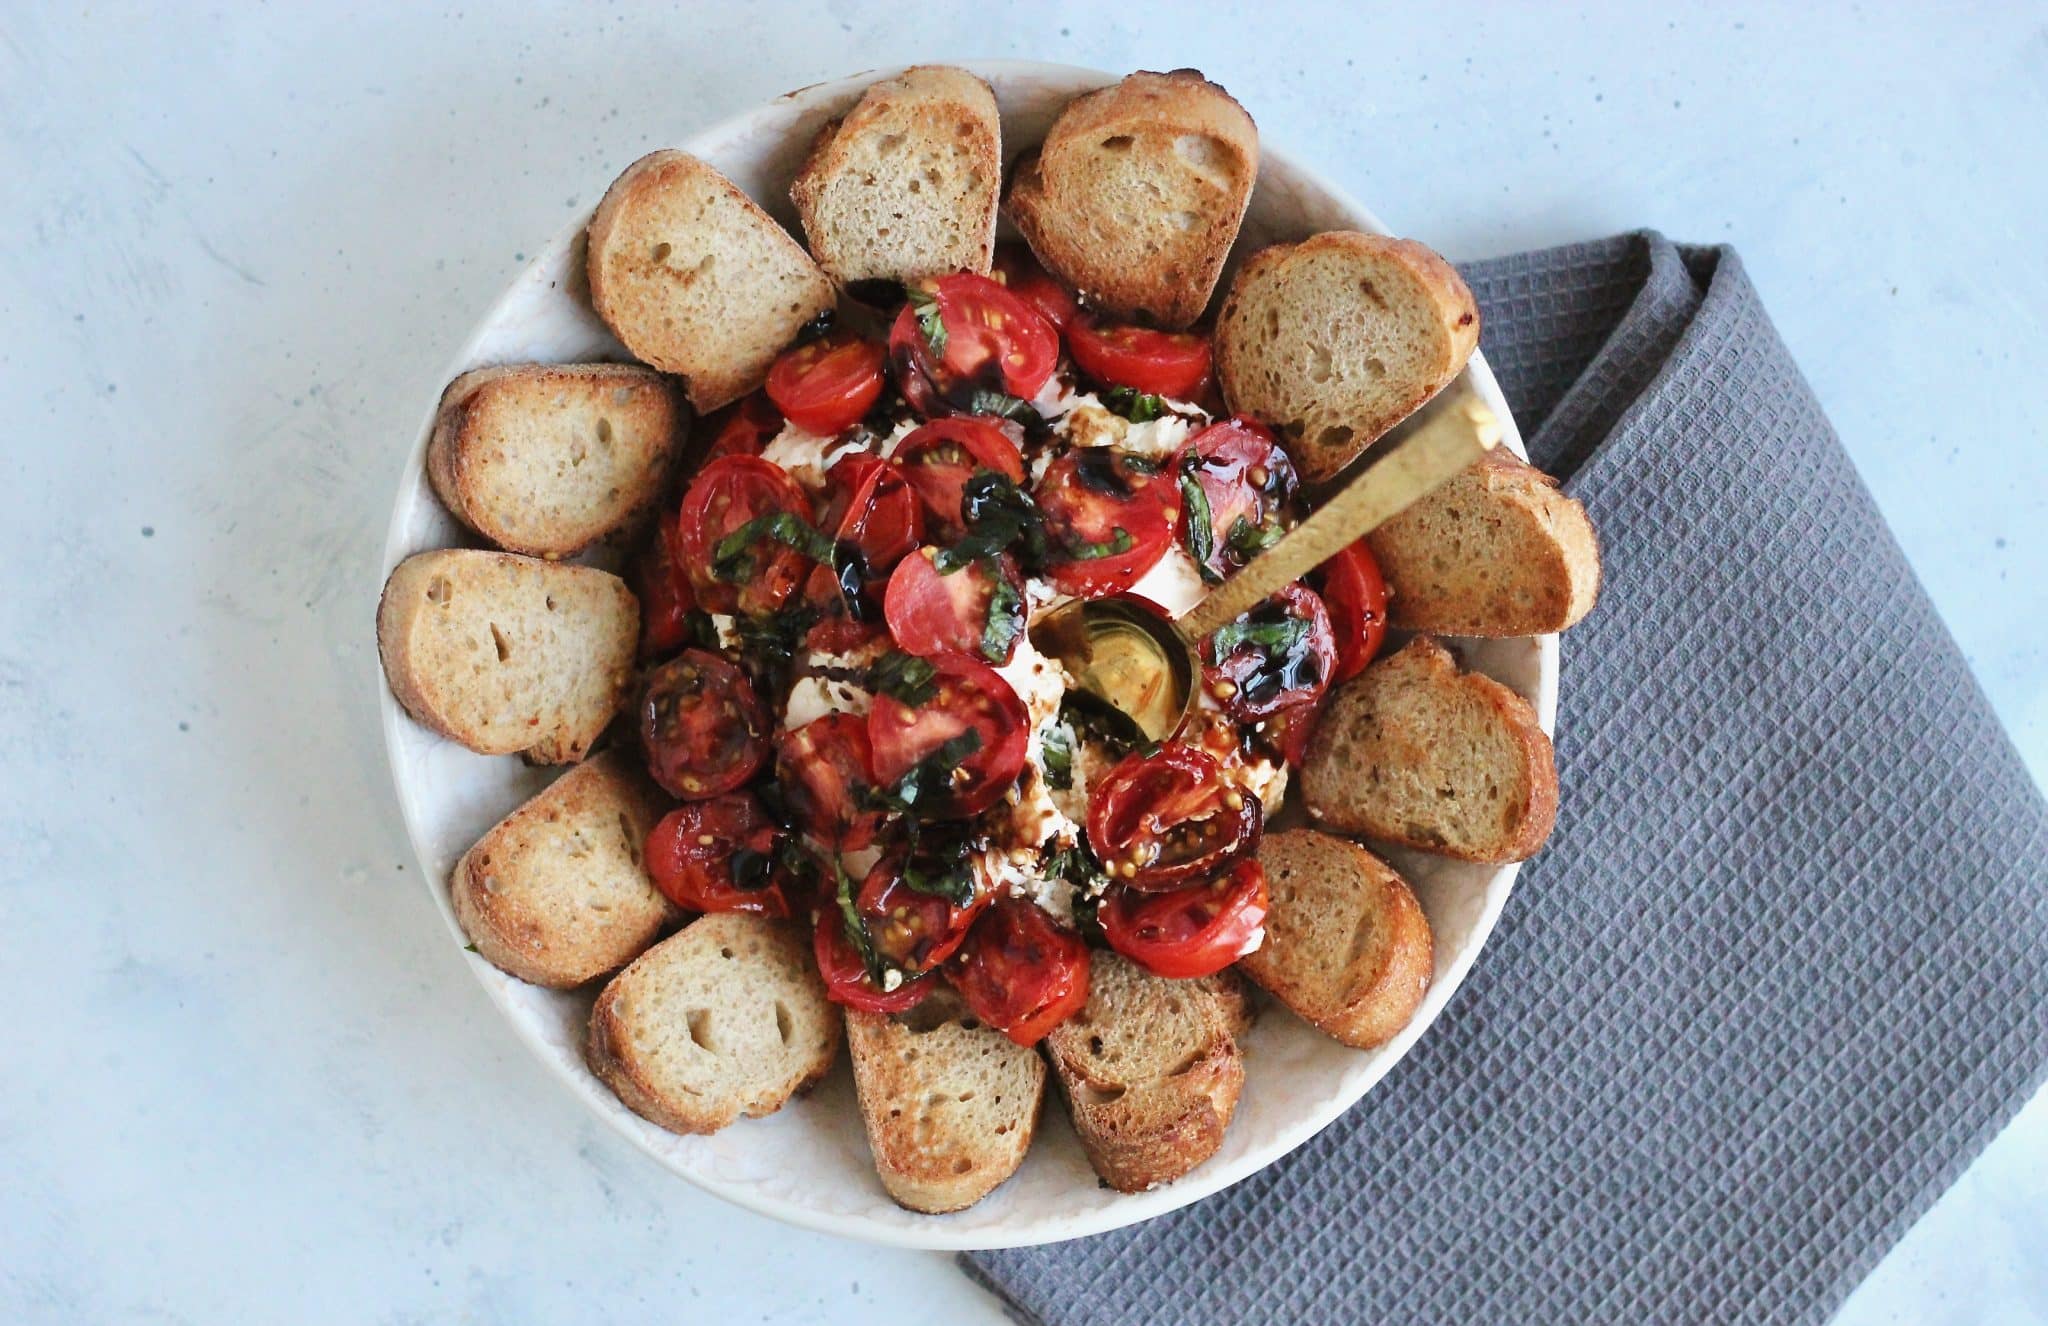 This creamy goat cheese caprese dip is a unique twist on a classic. Top it off with juicy tomatoes, fresh basil, and balsamic glaze to create a beautiful party-ready appetizer. #vegetarian #partyappetizer #healthyholiday #CheerfulChoices